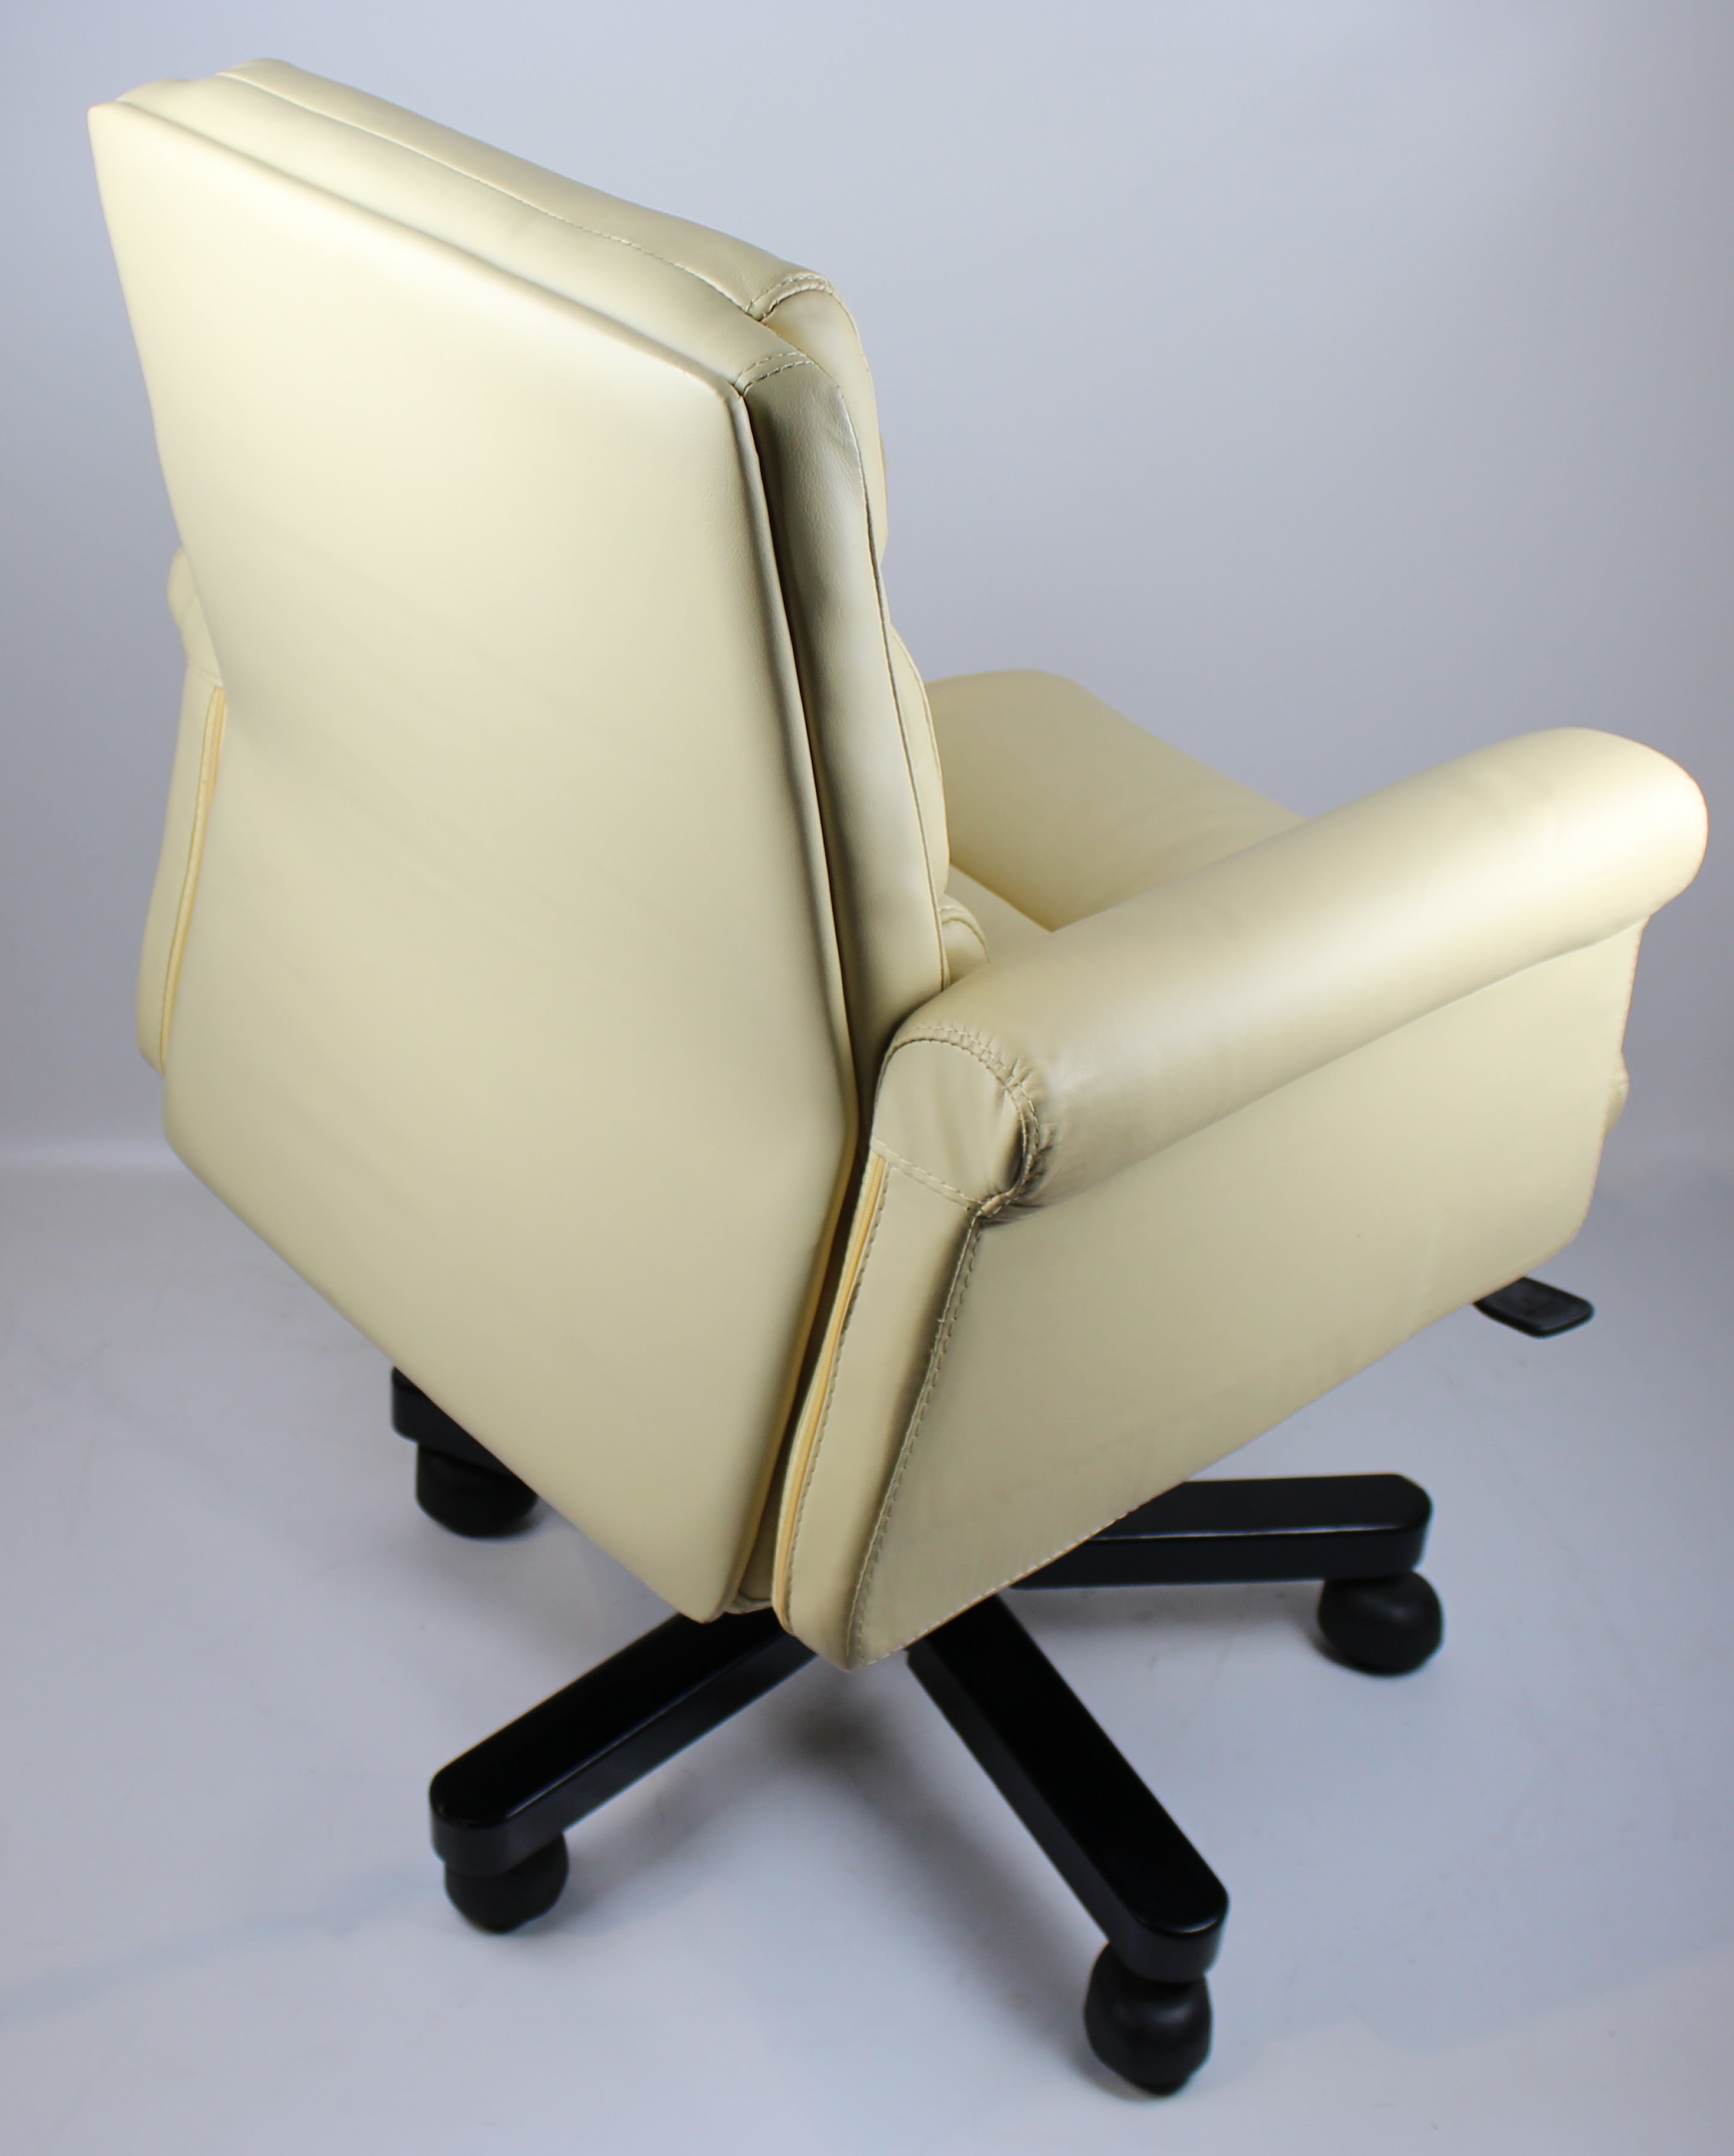 Cream Leather Executive Office Chair - B017-CRE